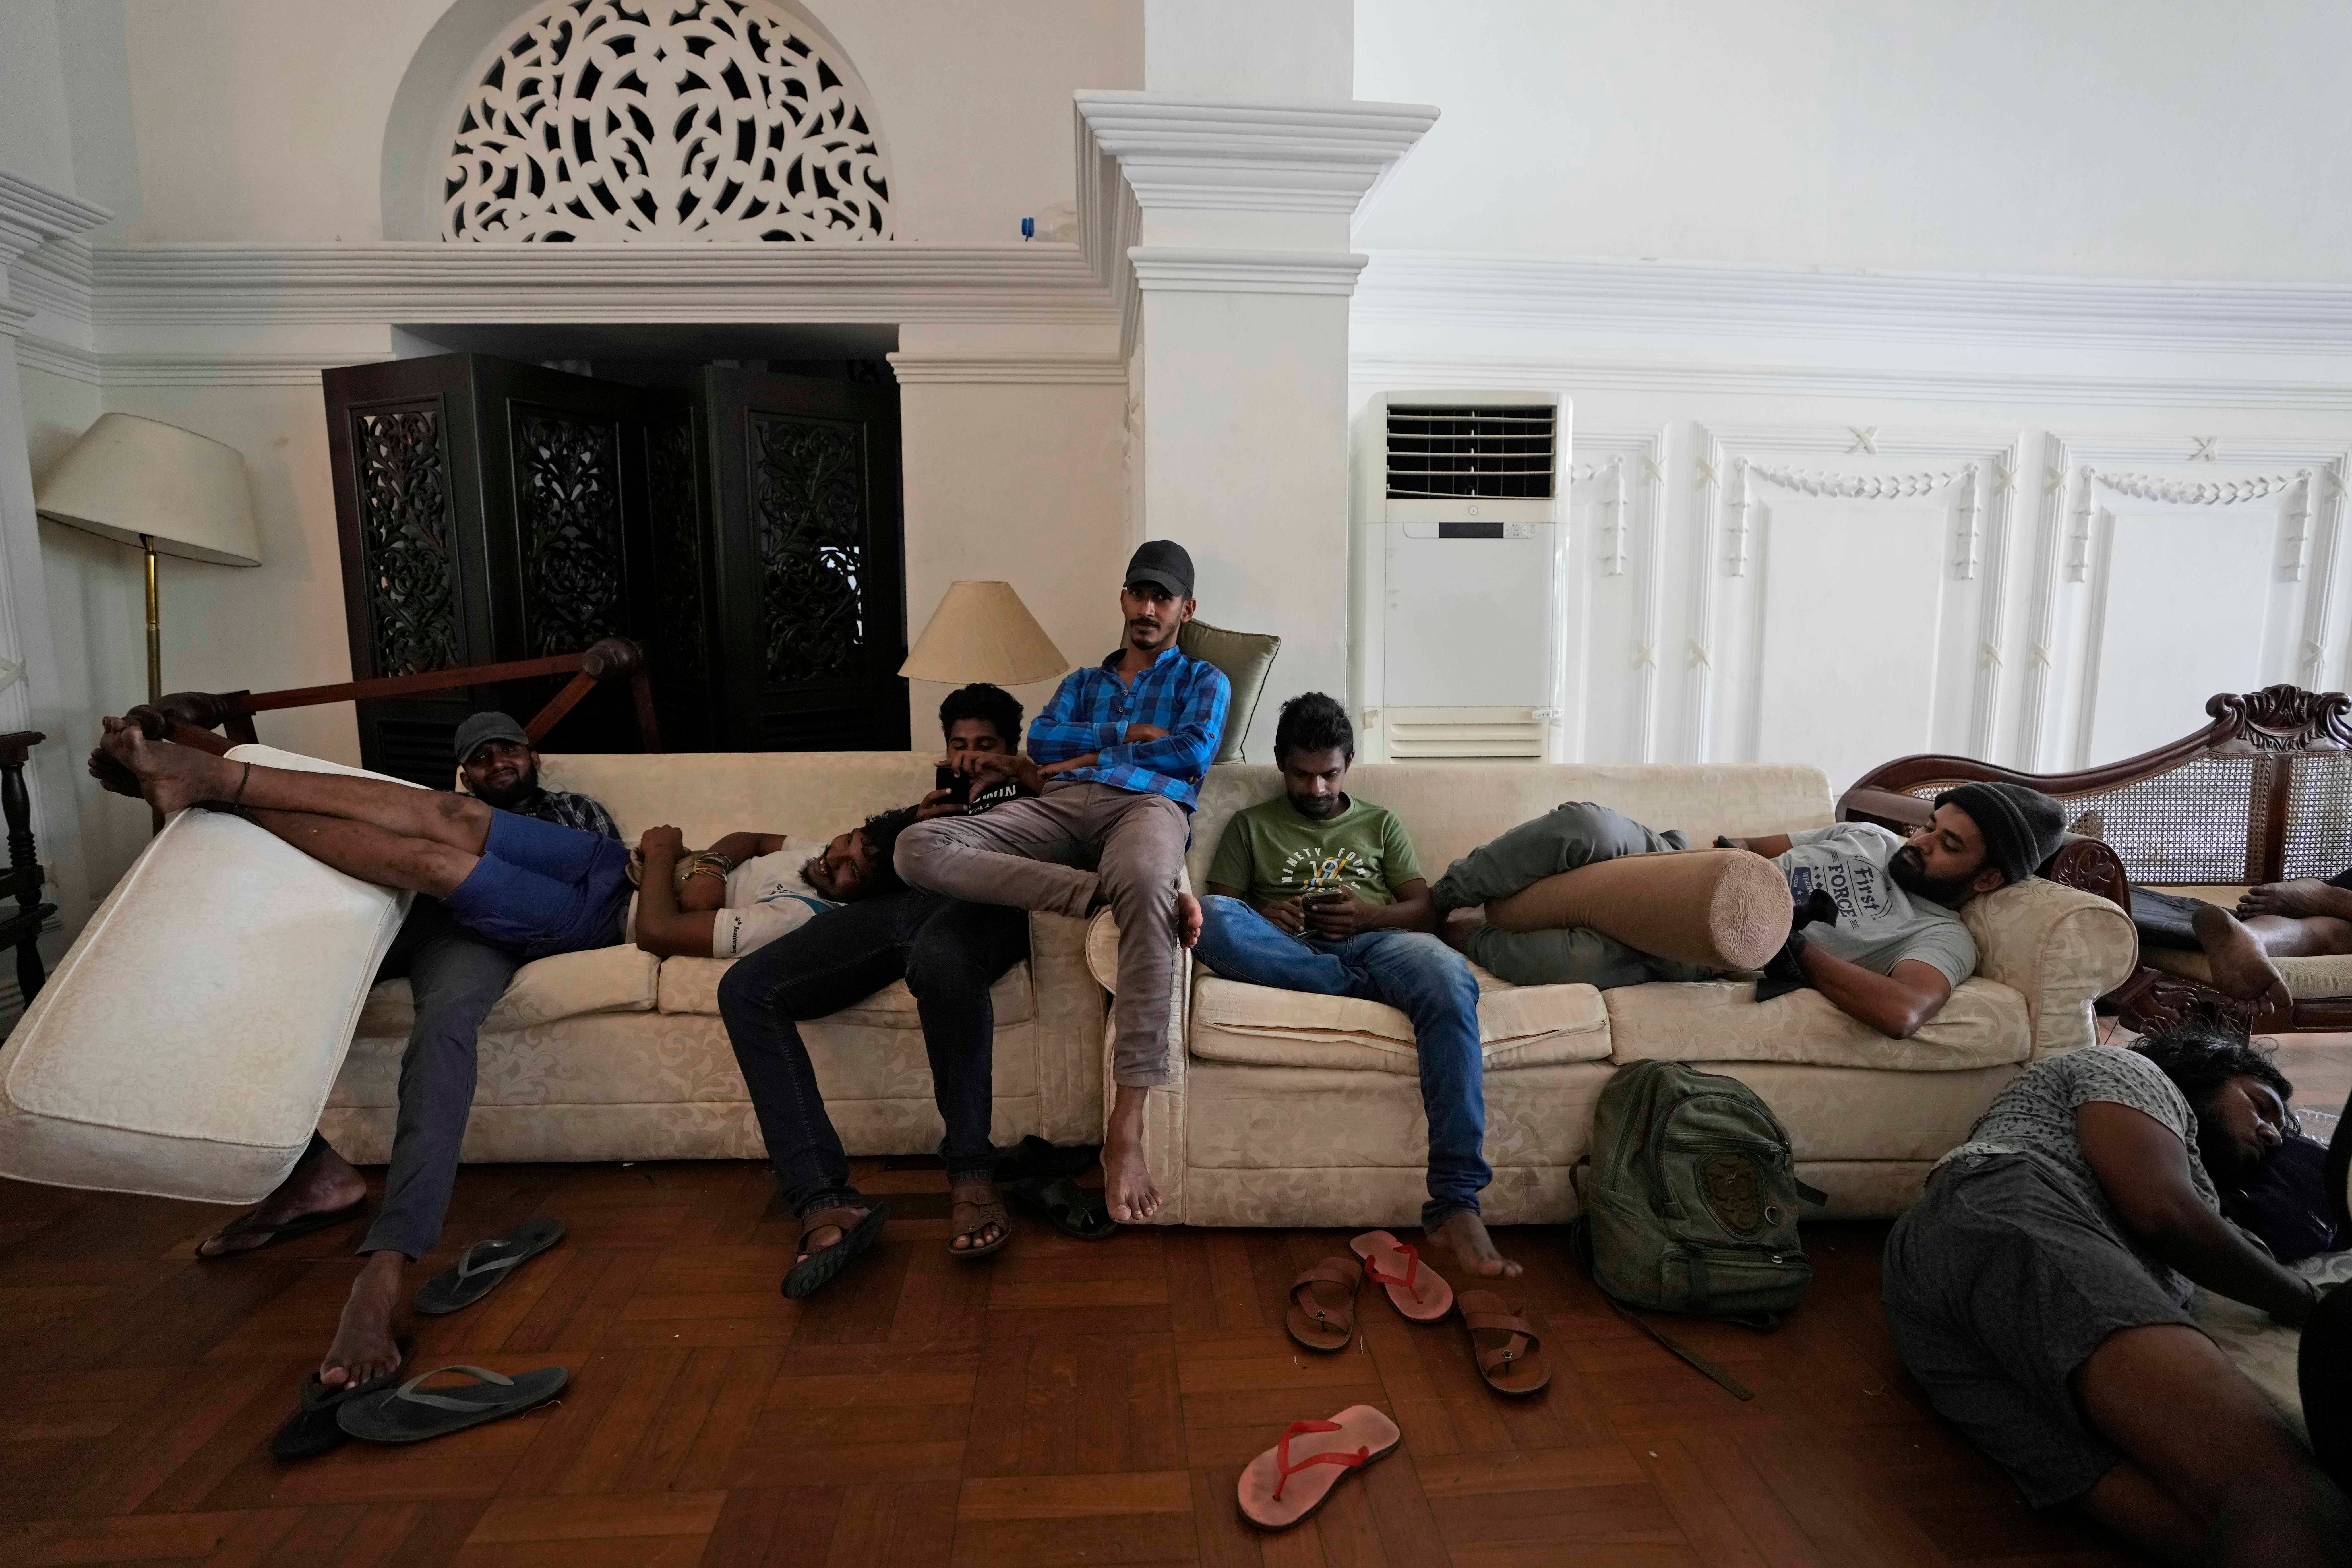 Protesters rest on sofas in prime minister’s house